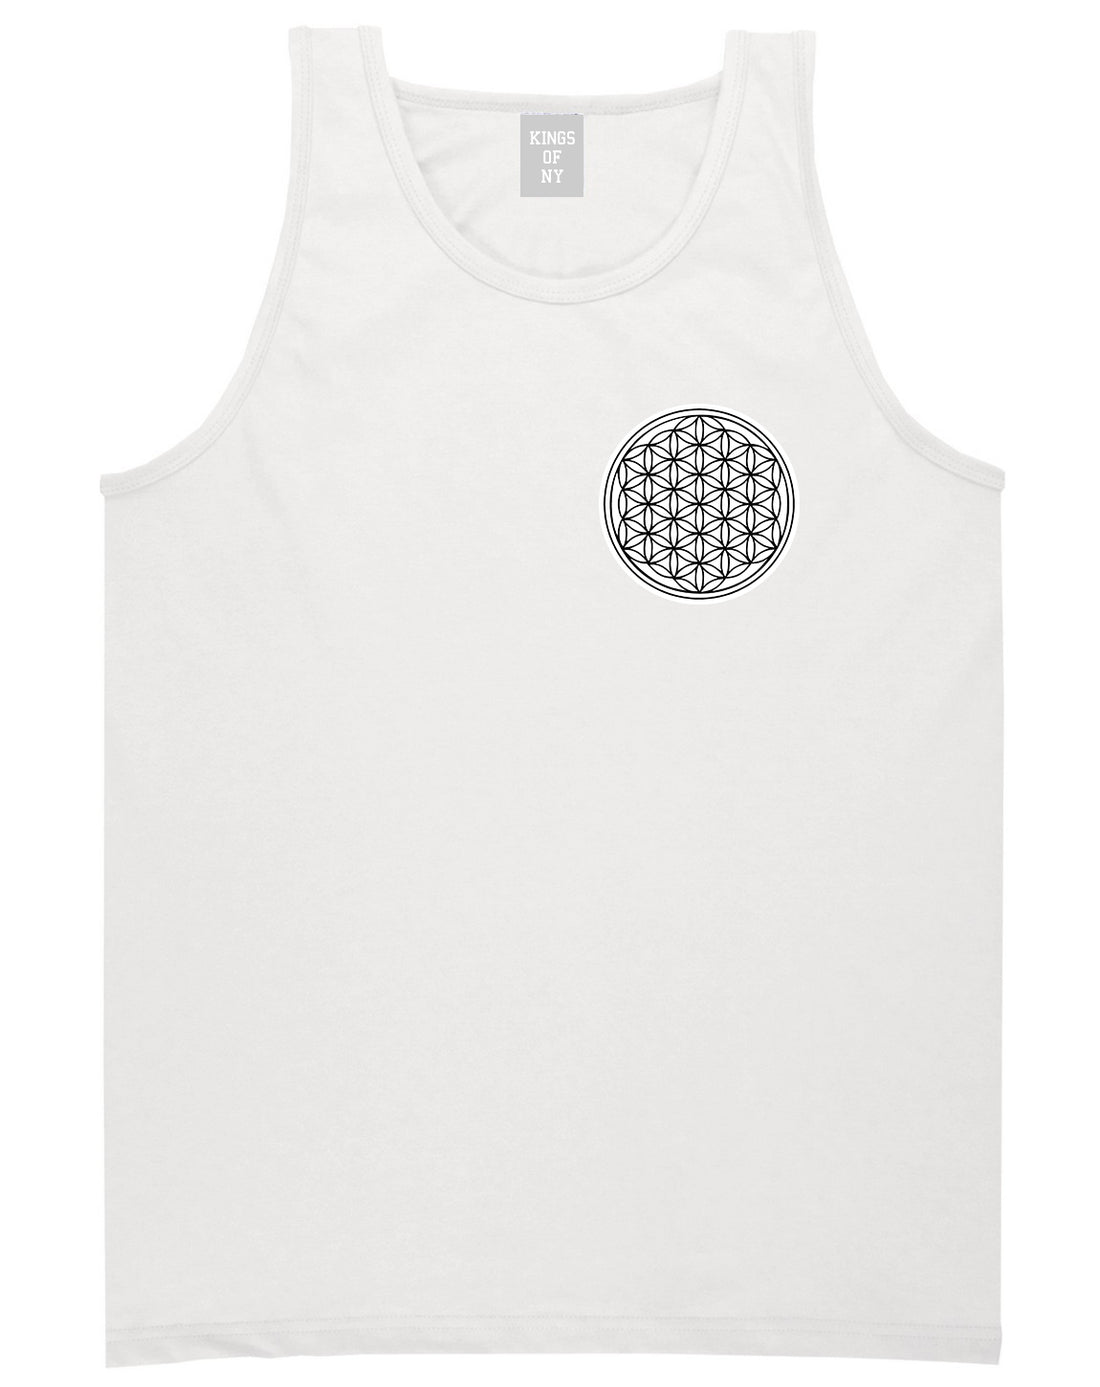 Flower Of Life Chest Mens White Tank Top Shirt by KINGS OF NY